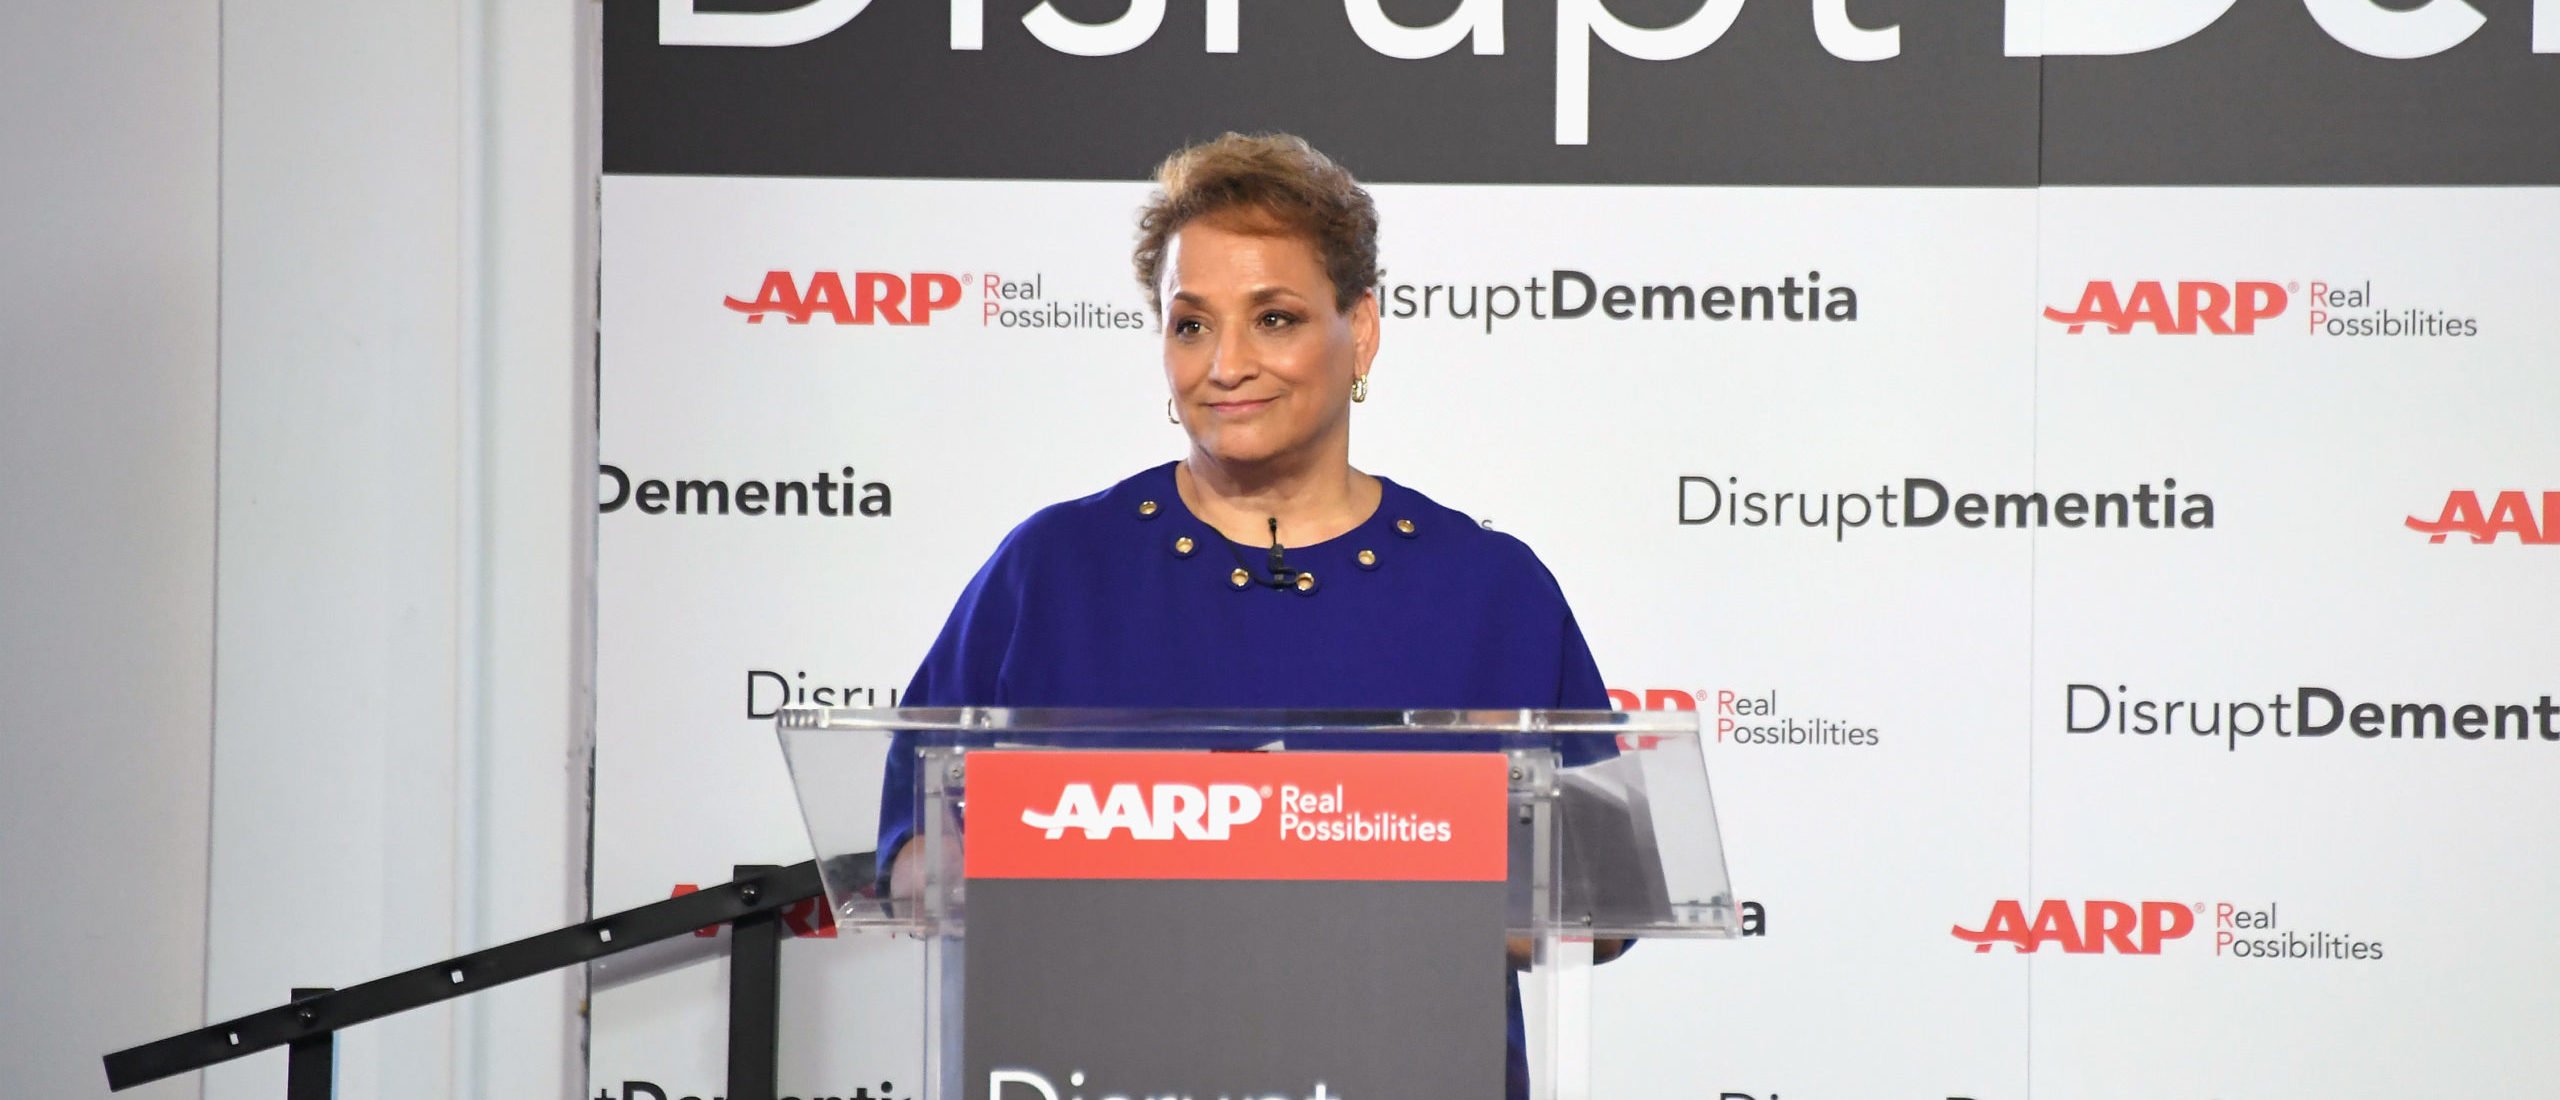 AARP CEO Jo Ann Jenkins speaks onstage during a brain health event hosted by AARP featuring Katie Couric, Jane Krakowski and AARP CEO Jo Ann Jenkins to #DisruptDementia at Neuehouse on June 25, 2018 in New York City. (Photo by Mike Coppola/Getty Images for AARP)